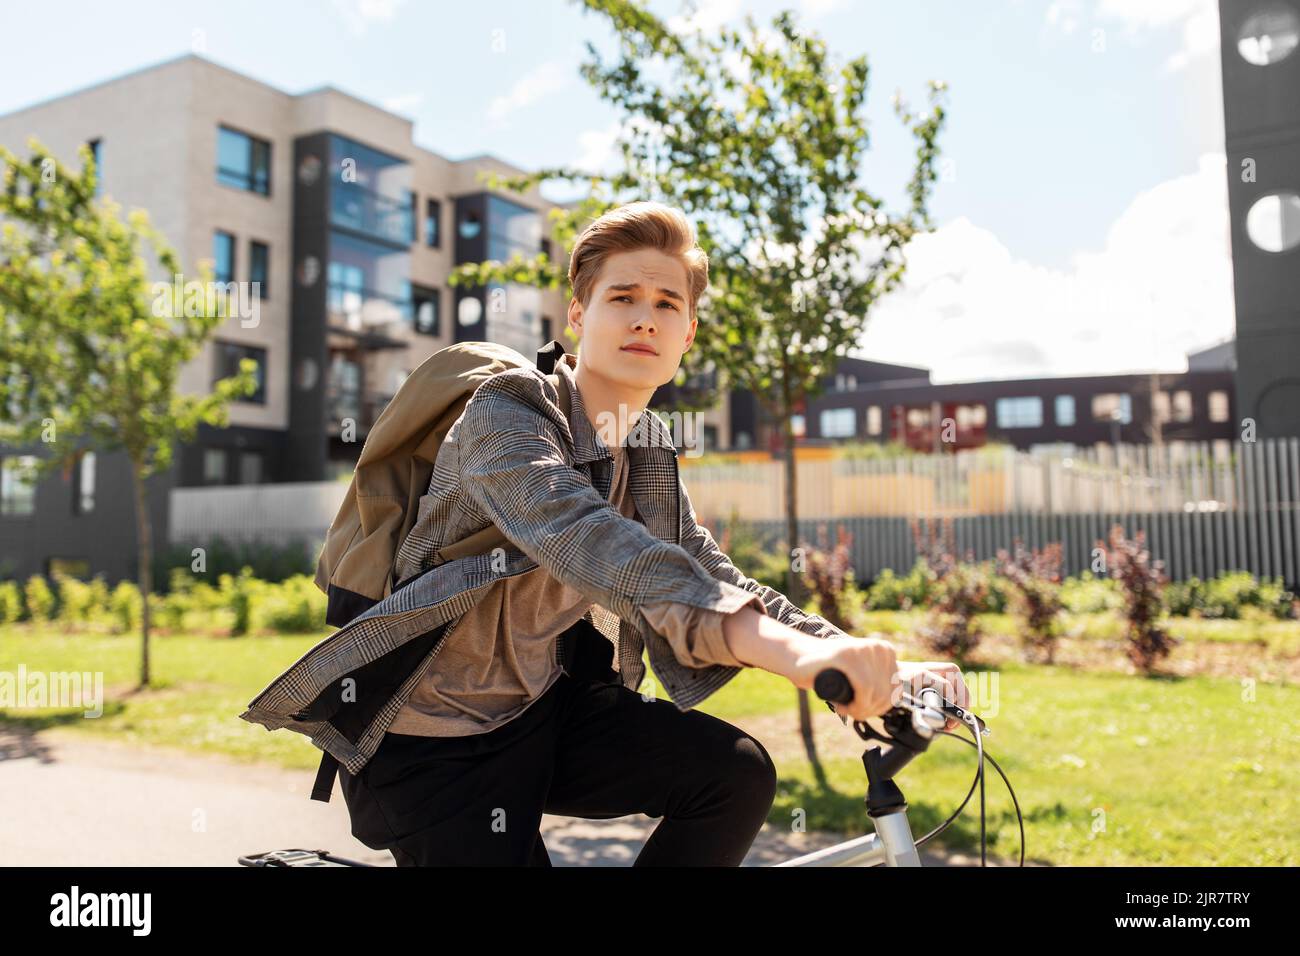 young man riding bicycle on city street Stock Photo